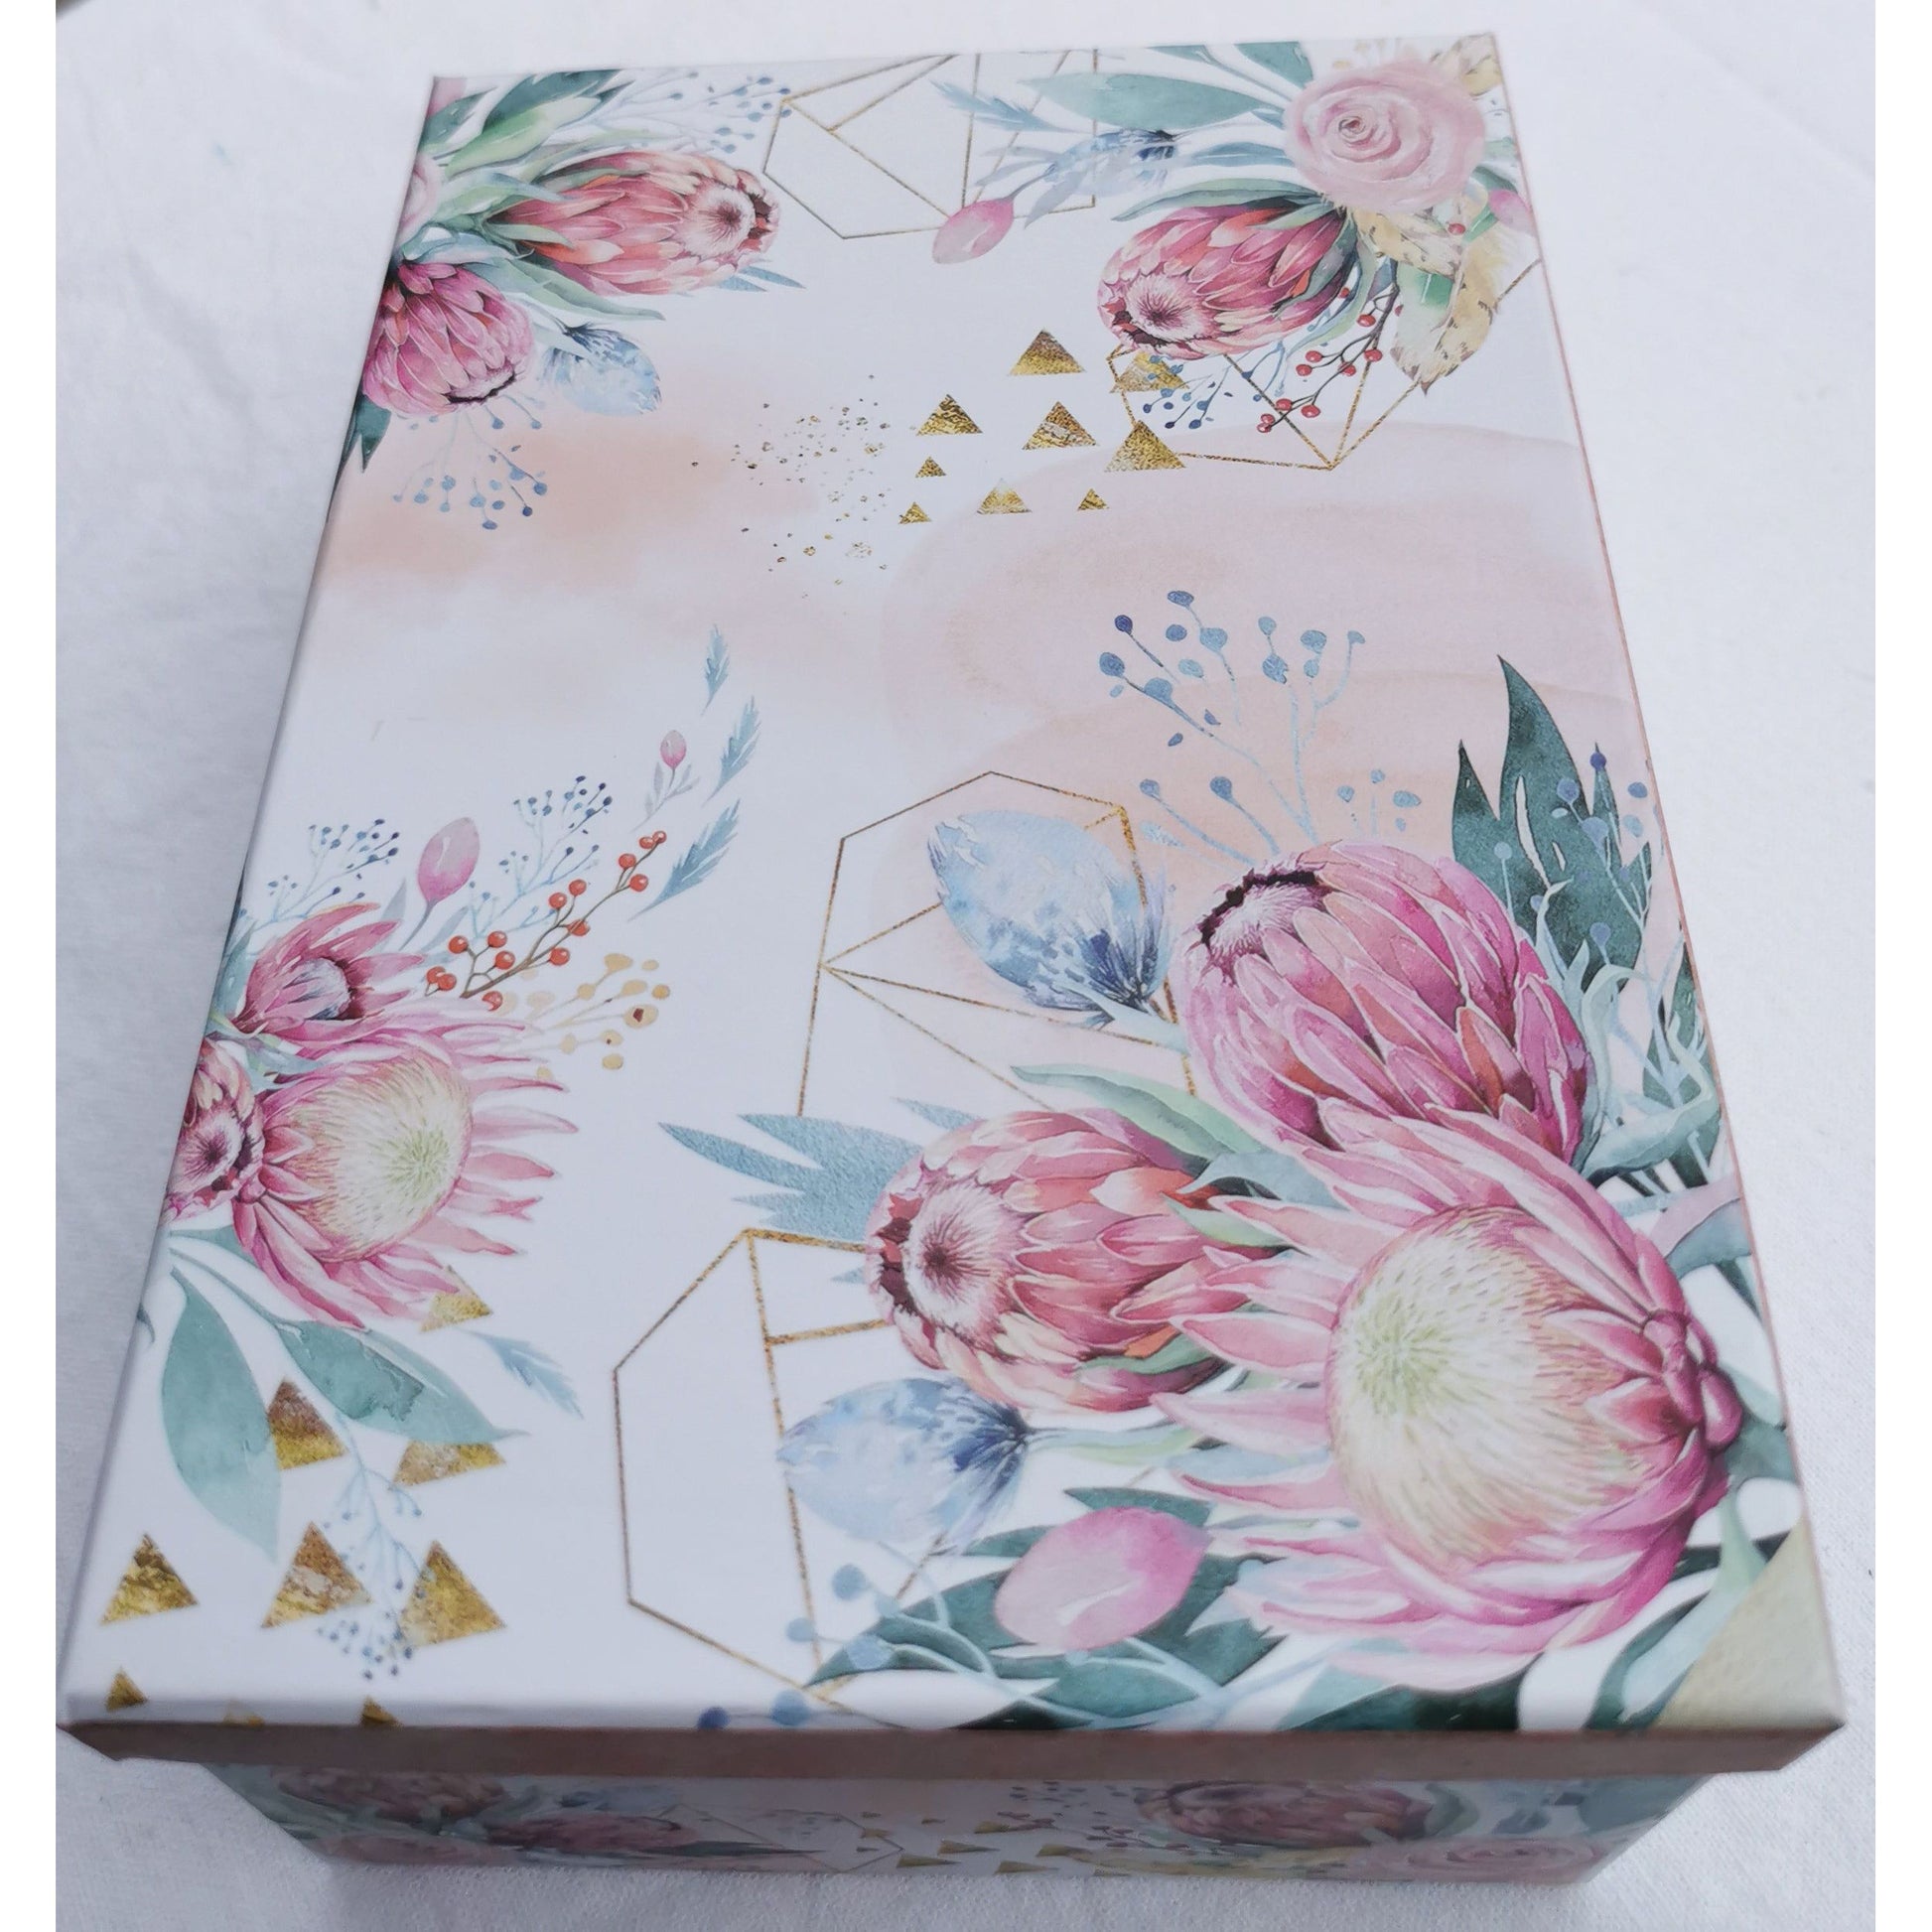 Photo shows a picture of the gift box on its own. The box design is floral with pink proteas